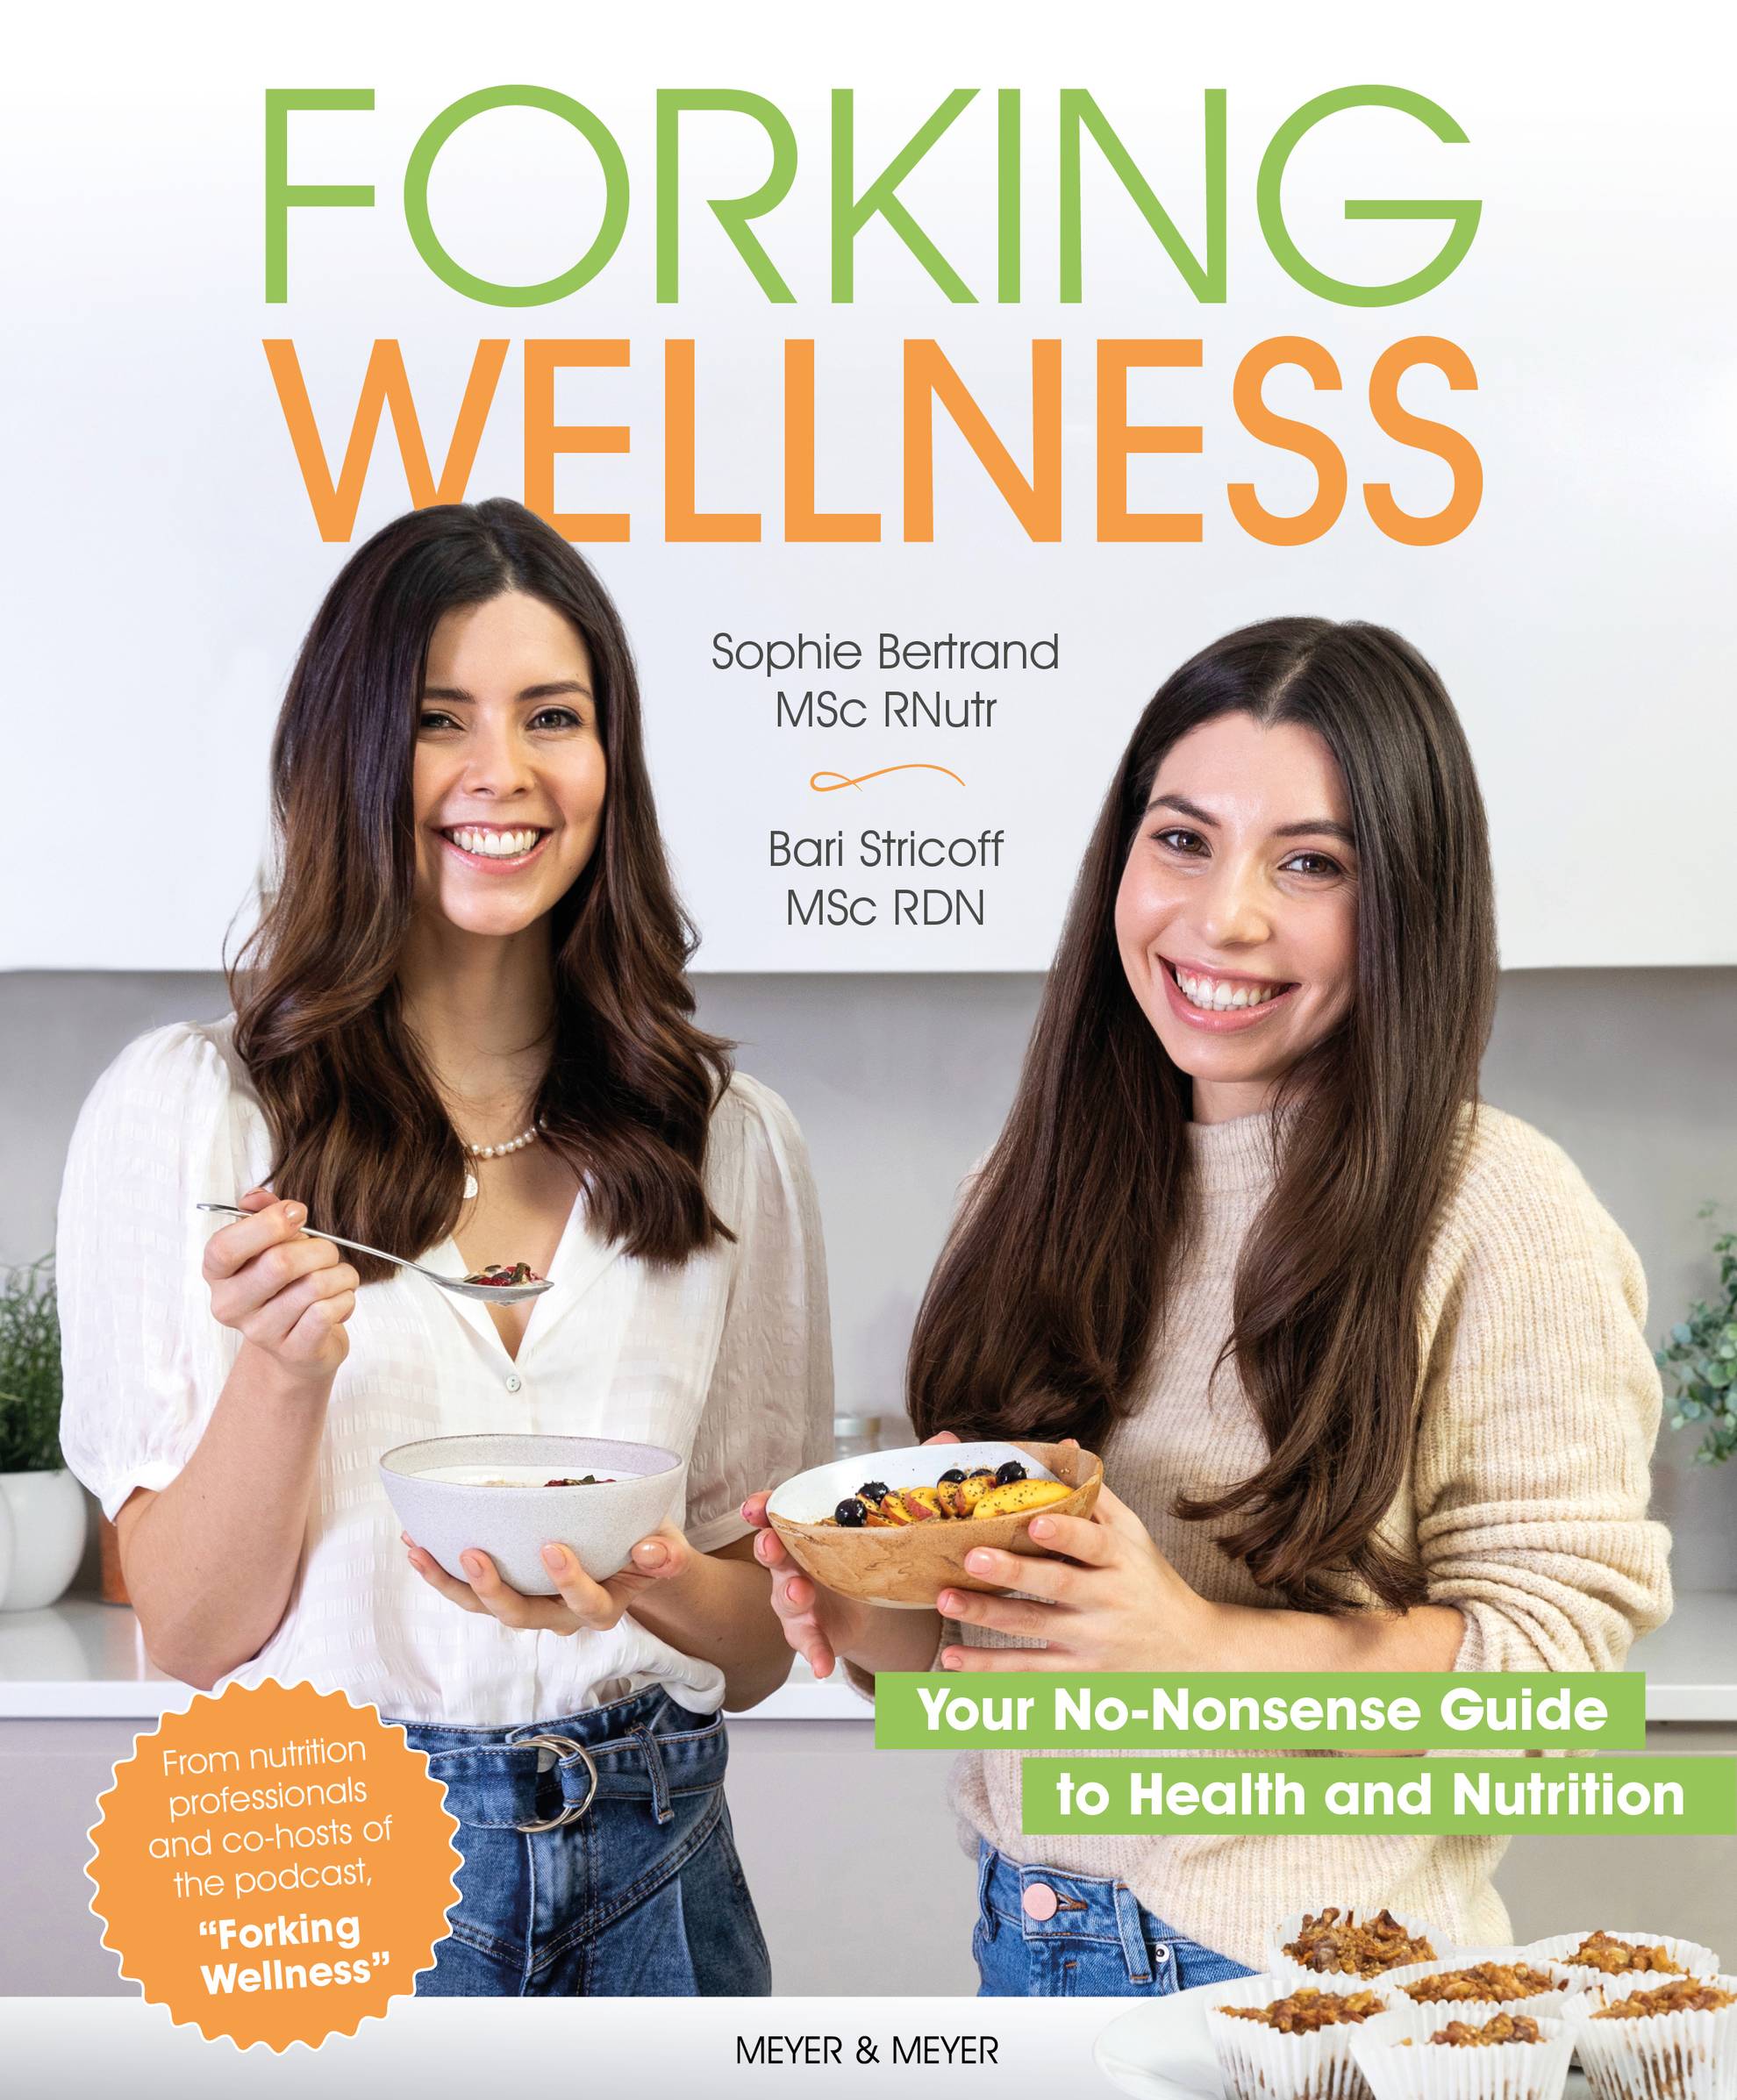 Forking Wellness book cover